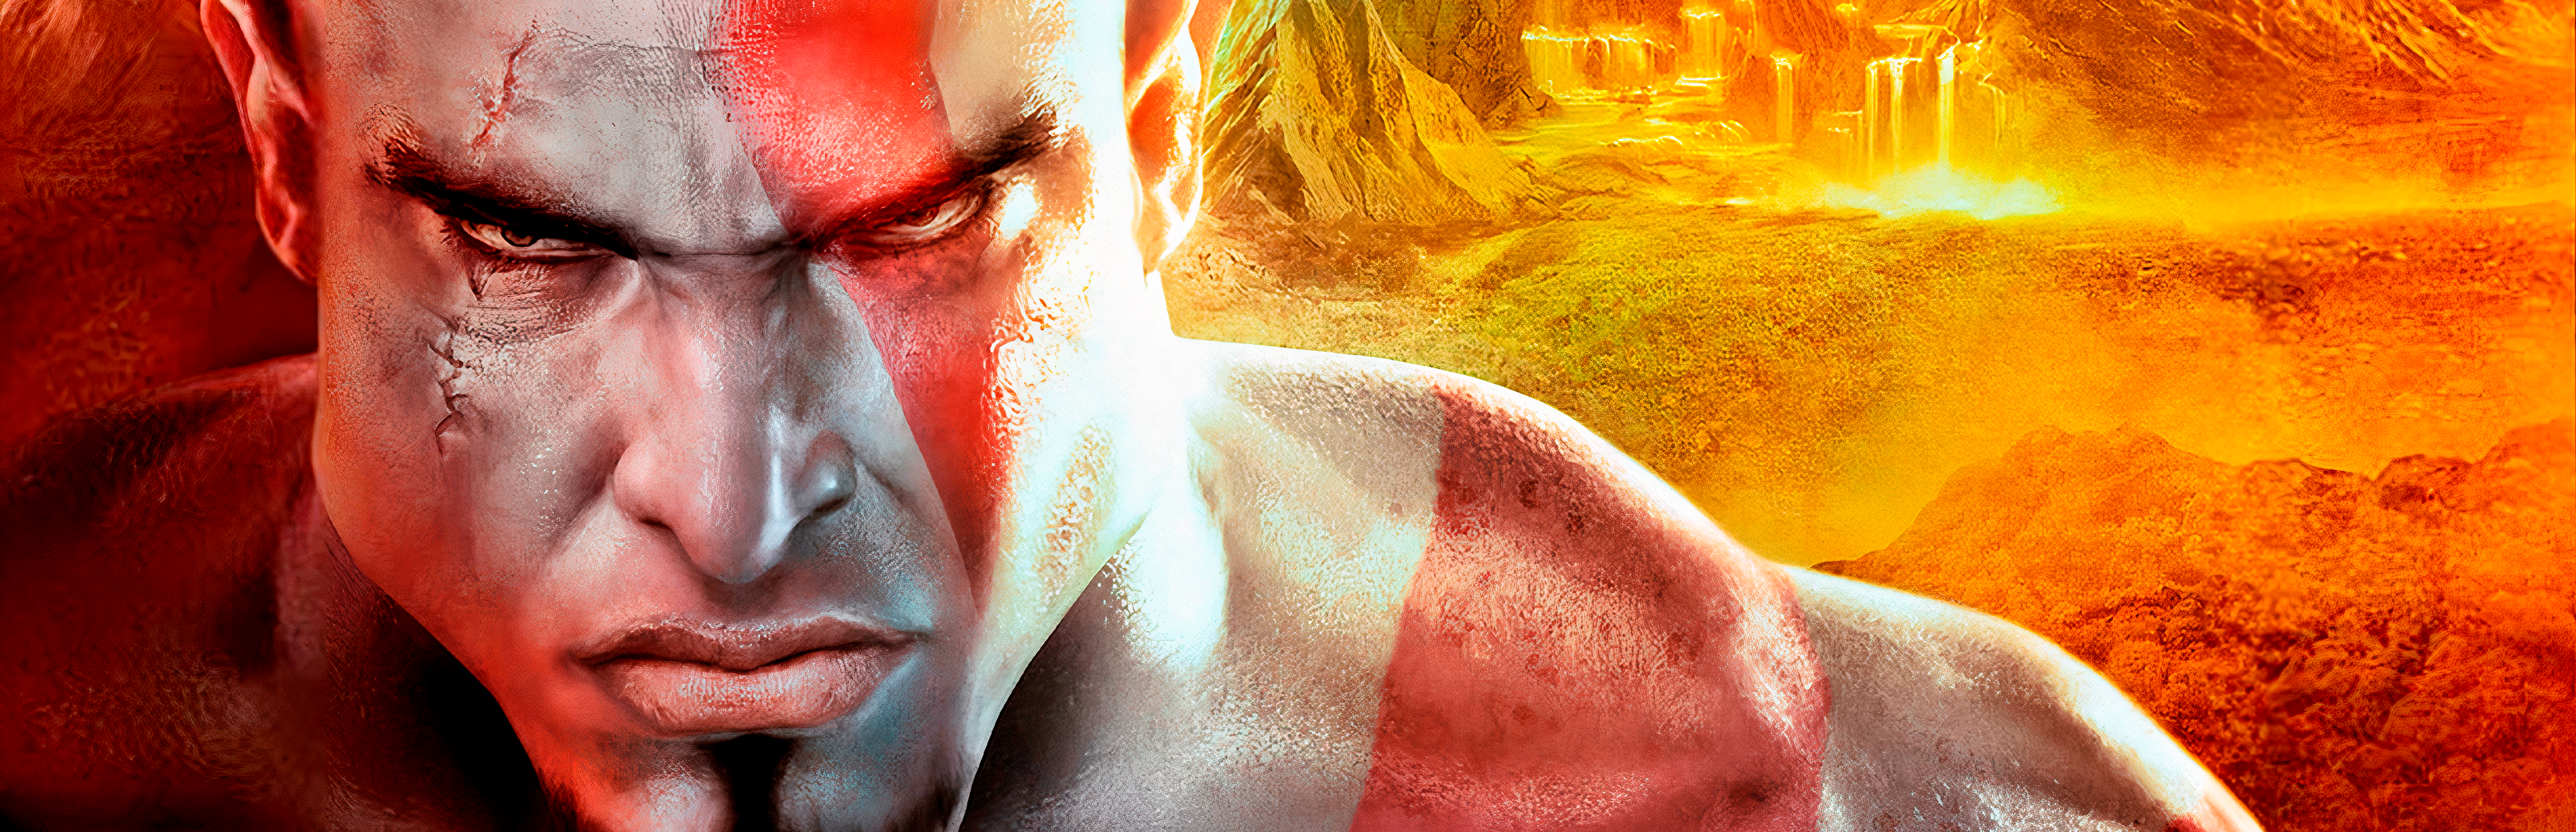 God of War: Chains of Olympus - HD Texture Pack • 60 FPS • 3x Resolution